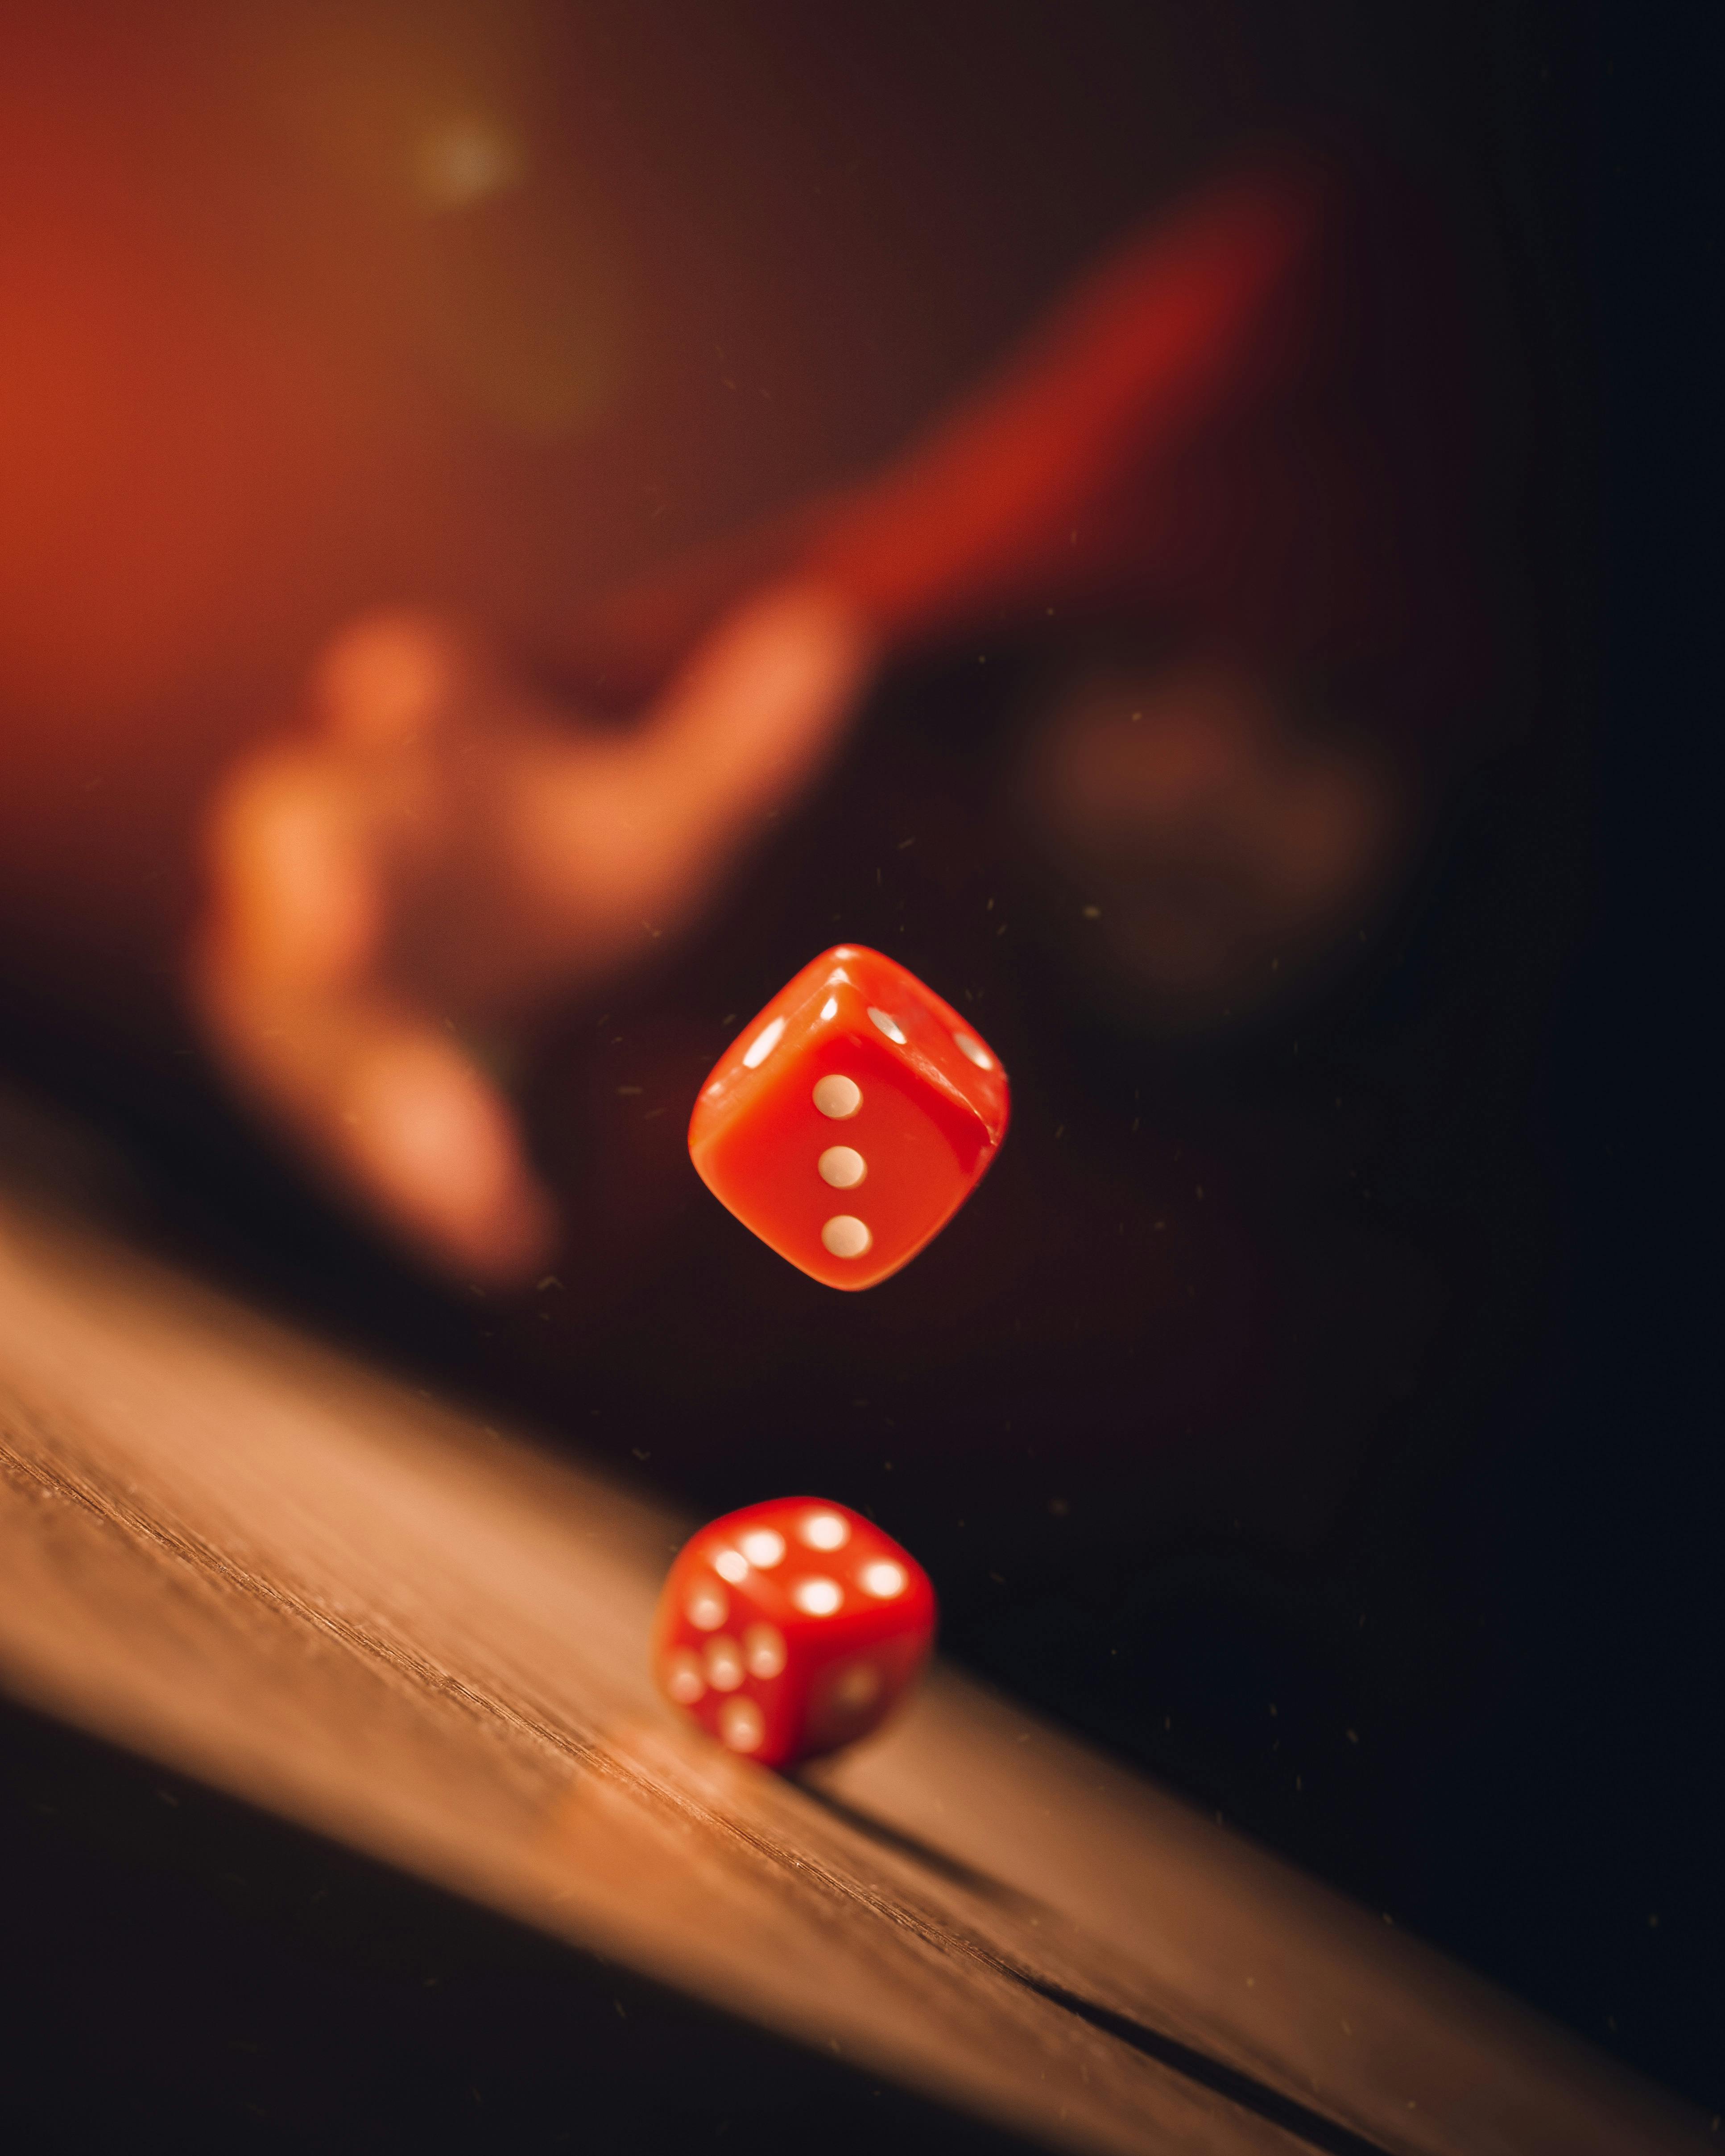 Dice Roll Stock Photo, Picture and Royalty Free Image. Image 11709947.